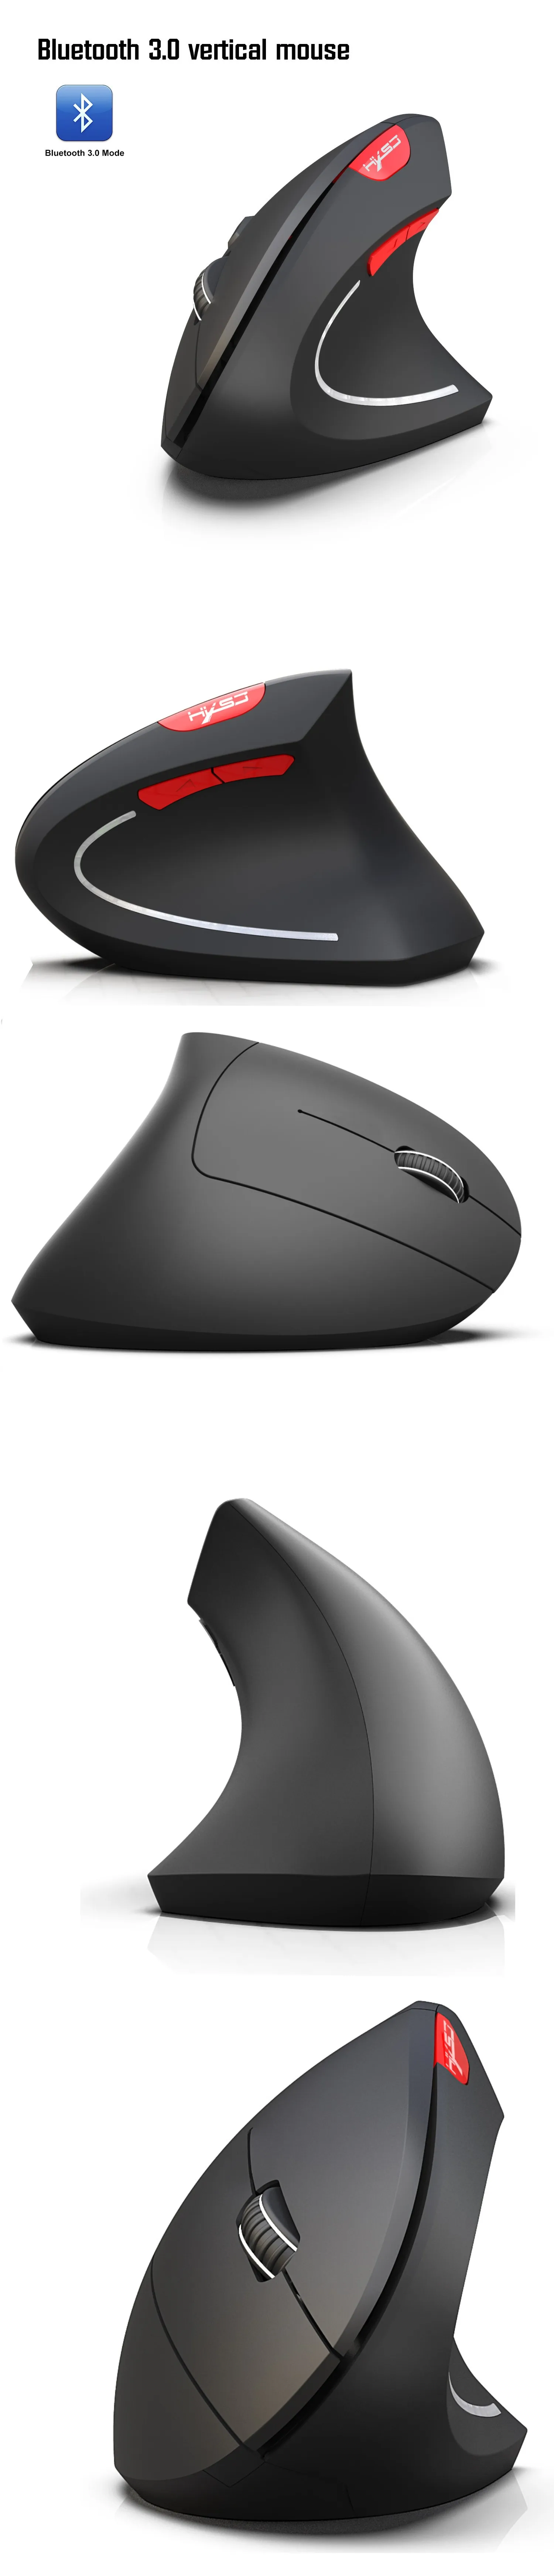 Vertical Bluetooth Mouse